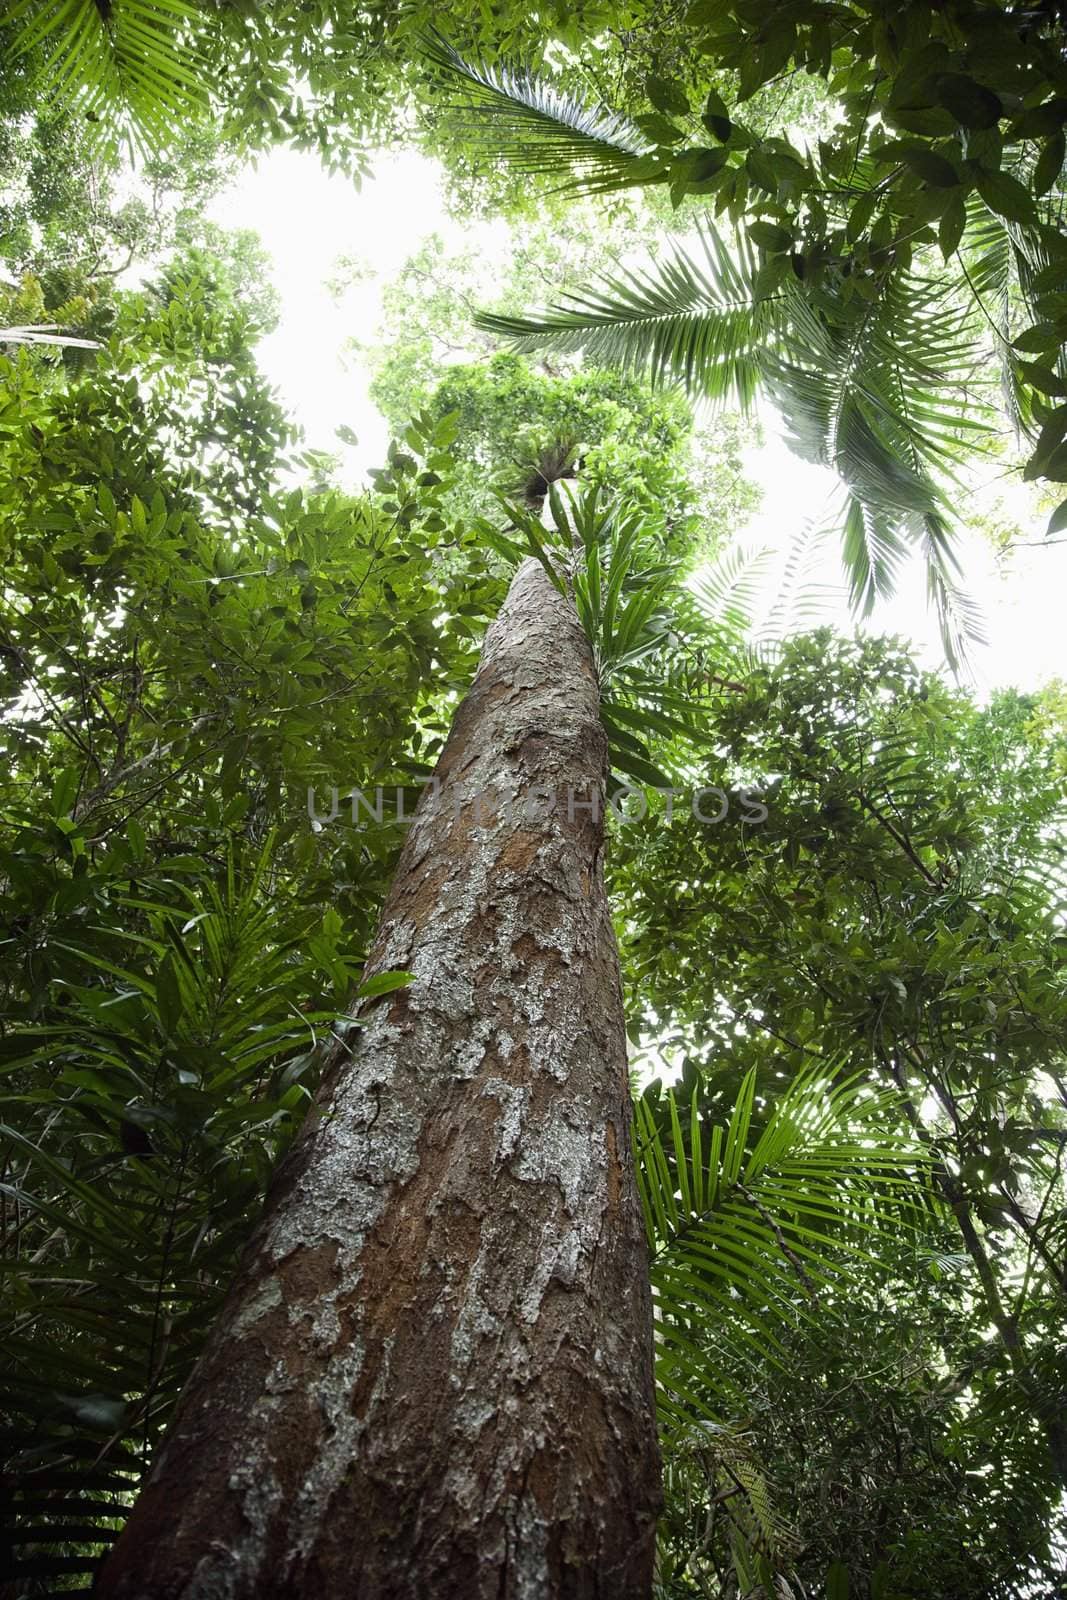 Low angle view of tall trees in Daintree Rainforest, Australia.